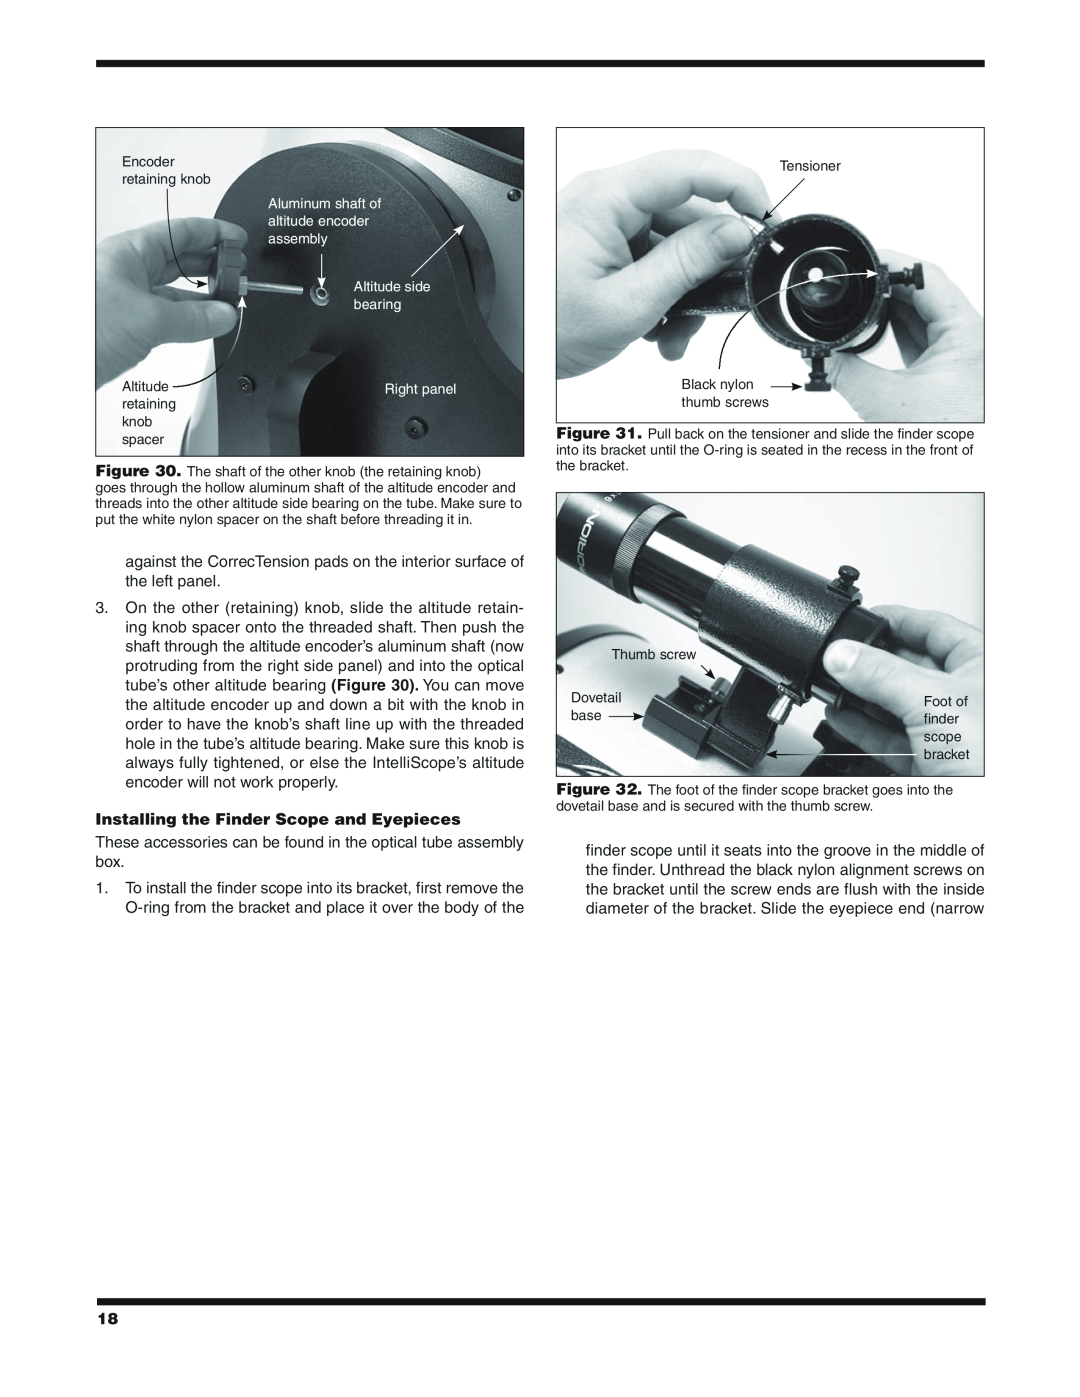 Orion 9791 instruction manual Installing the Finder Scope and Eyepieces 